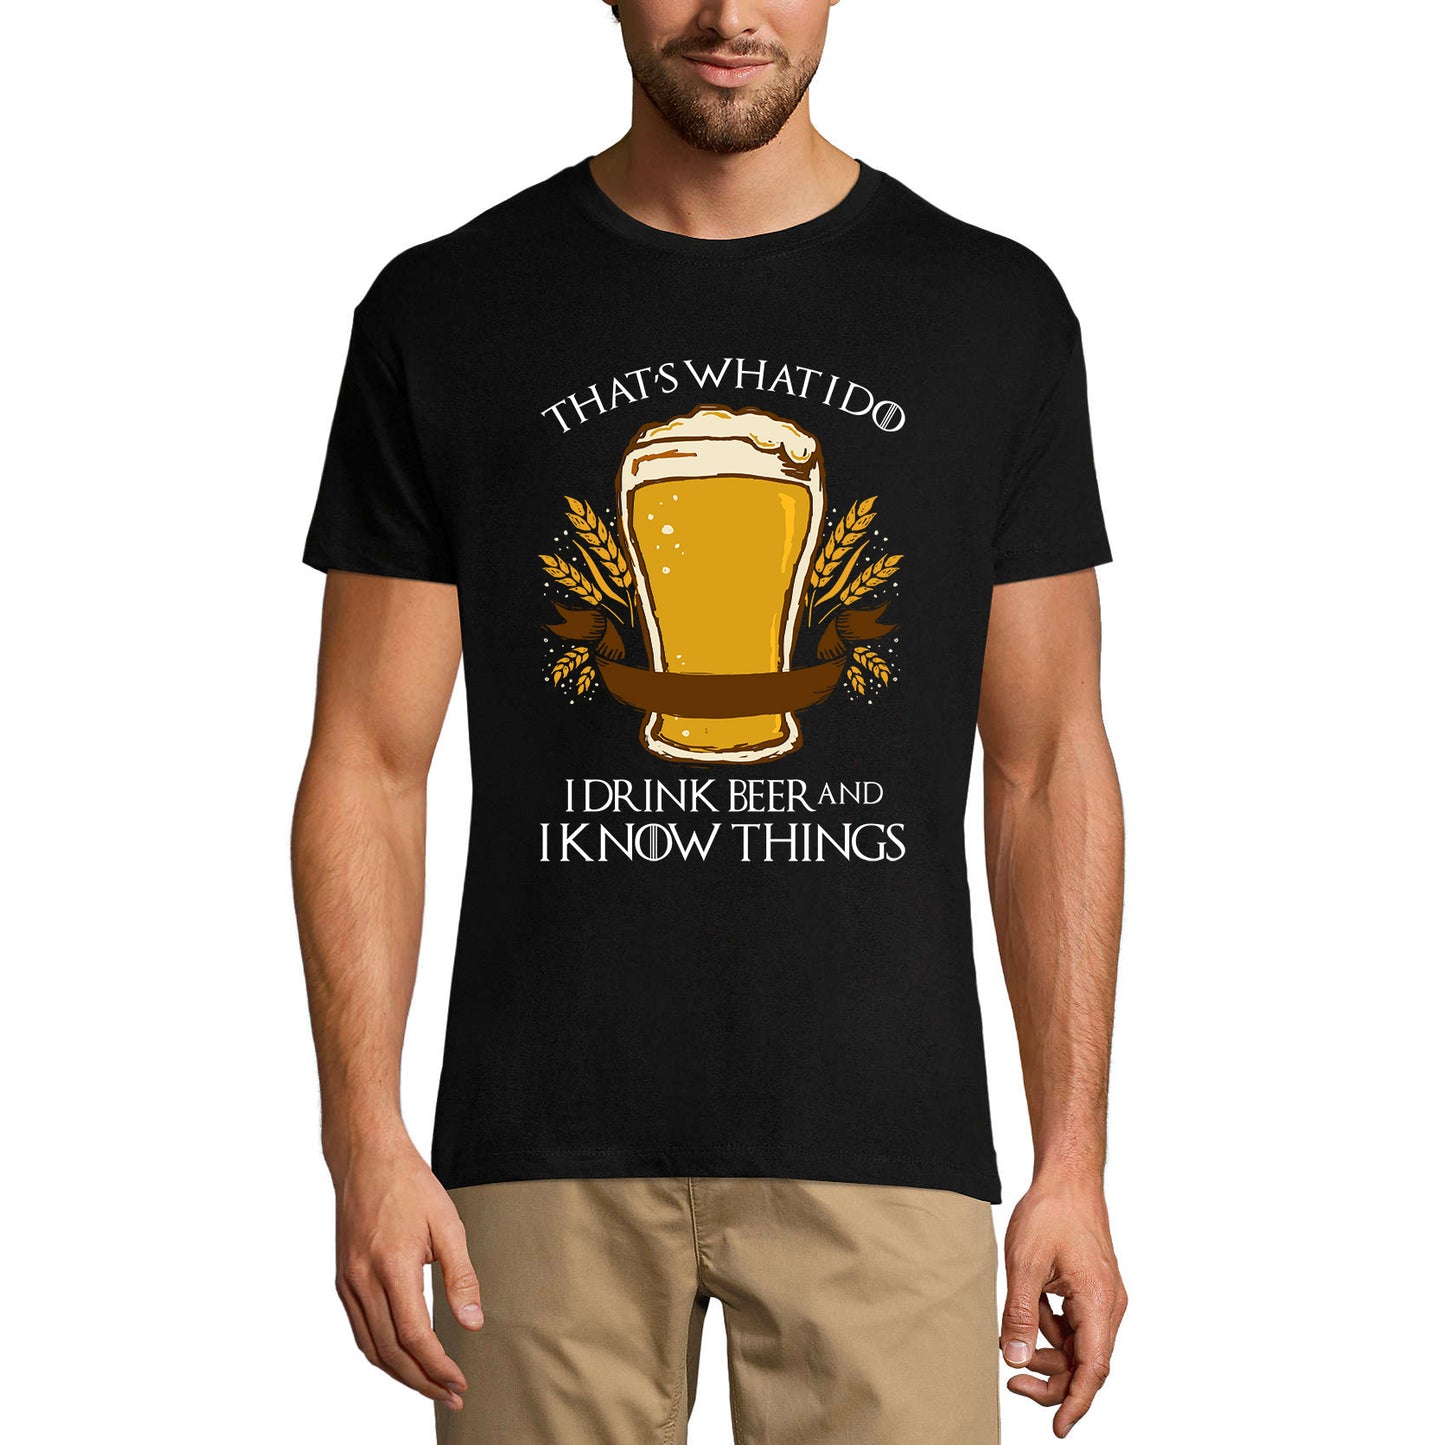 ULTRABASIC Men's T-Shirt That's What I Do I Drink Beer and I Know Things - Beer Lover Tee Shirt